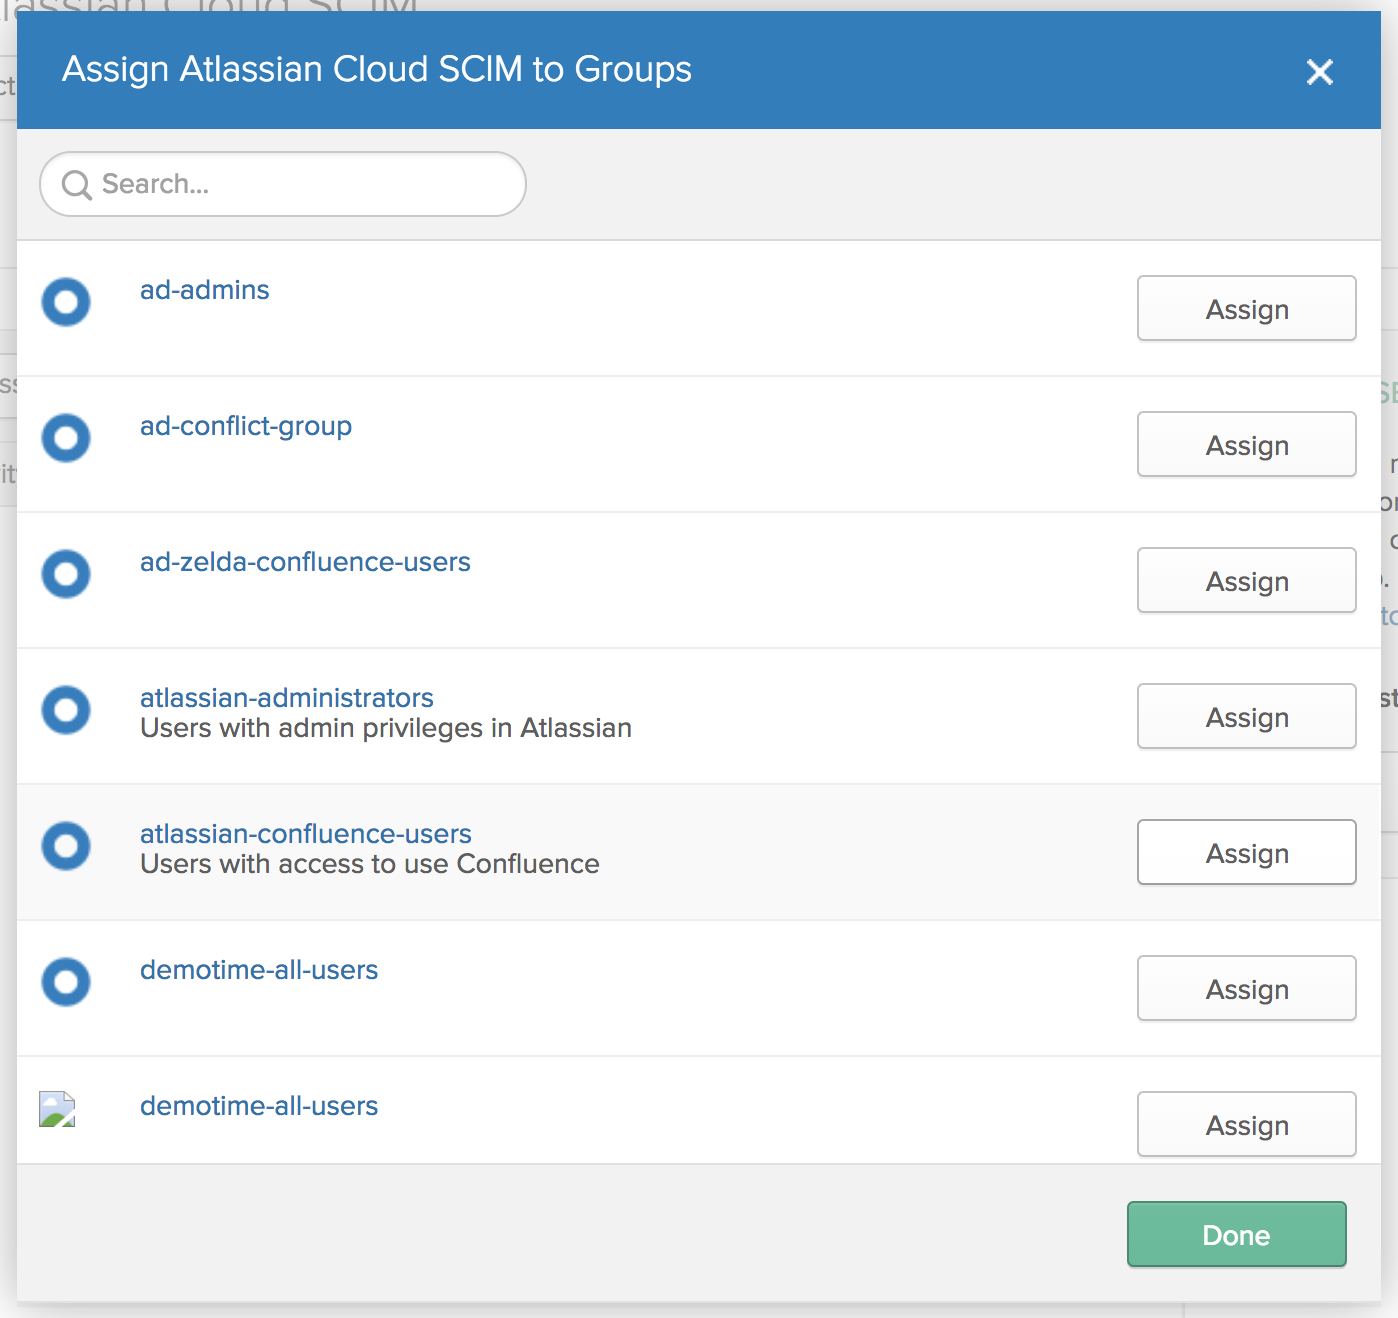 Assign Atlassian Cloud SCIM Groups list. Every group has an Assign button. There is a Done button at the bottom.